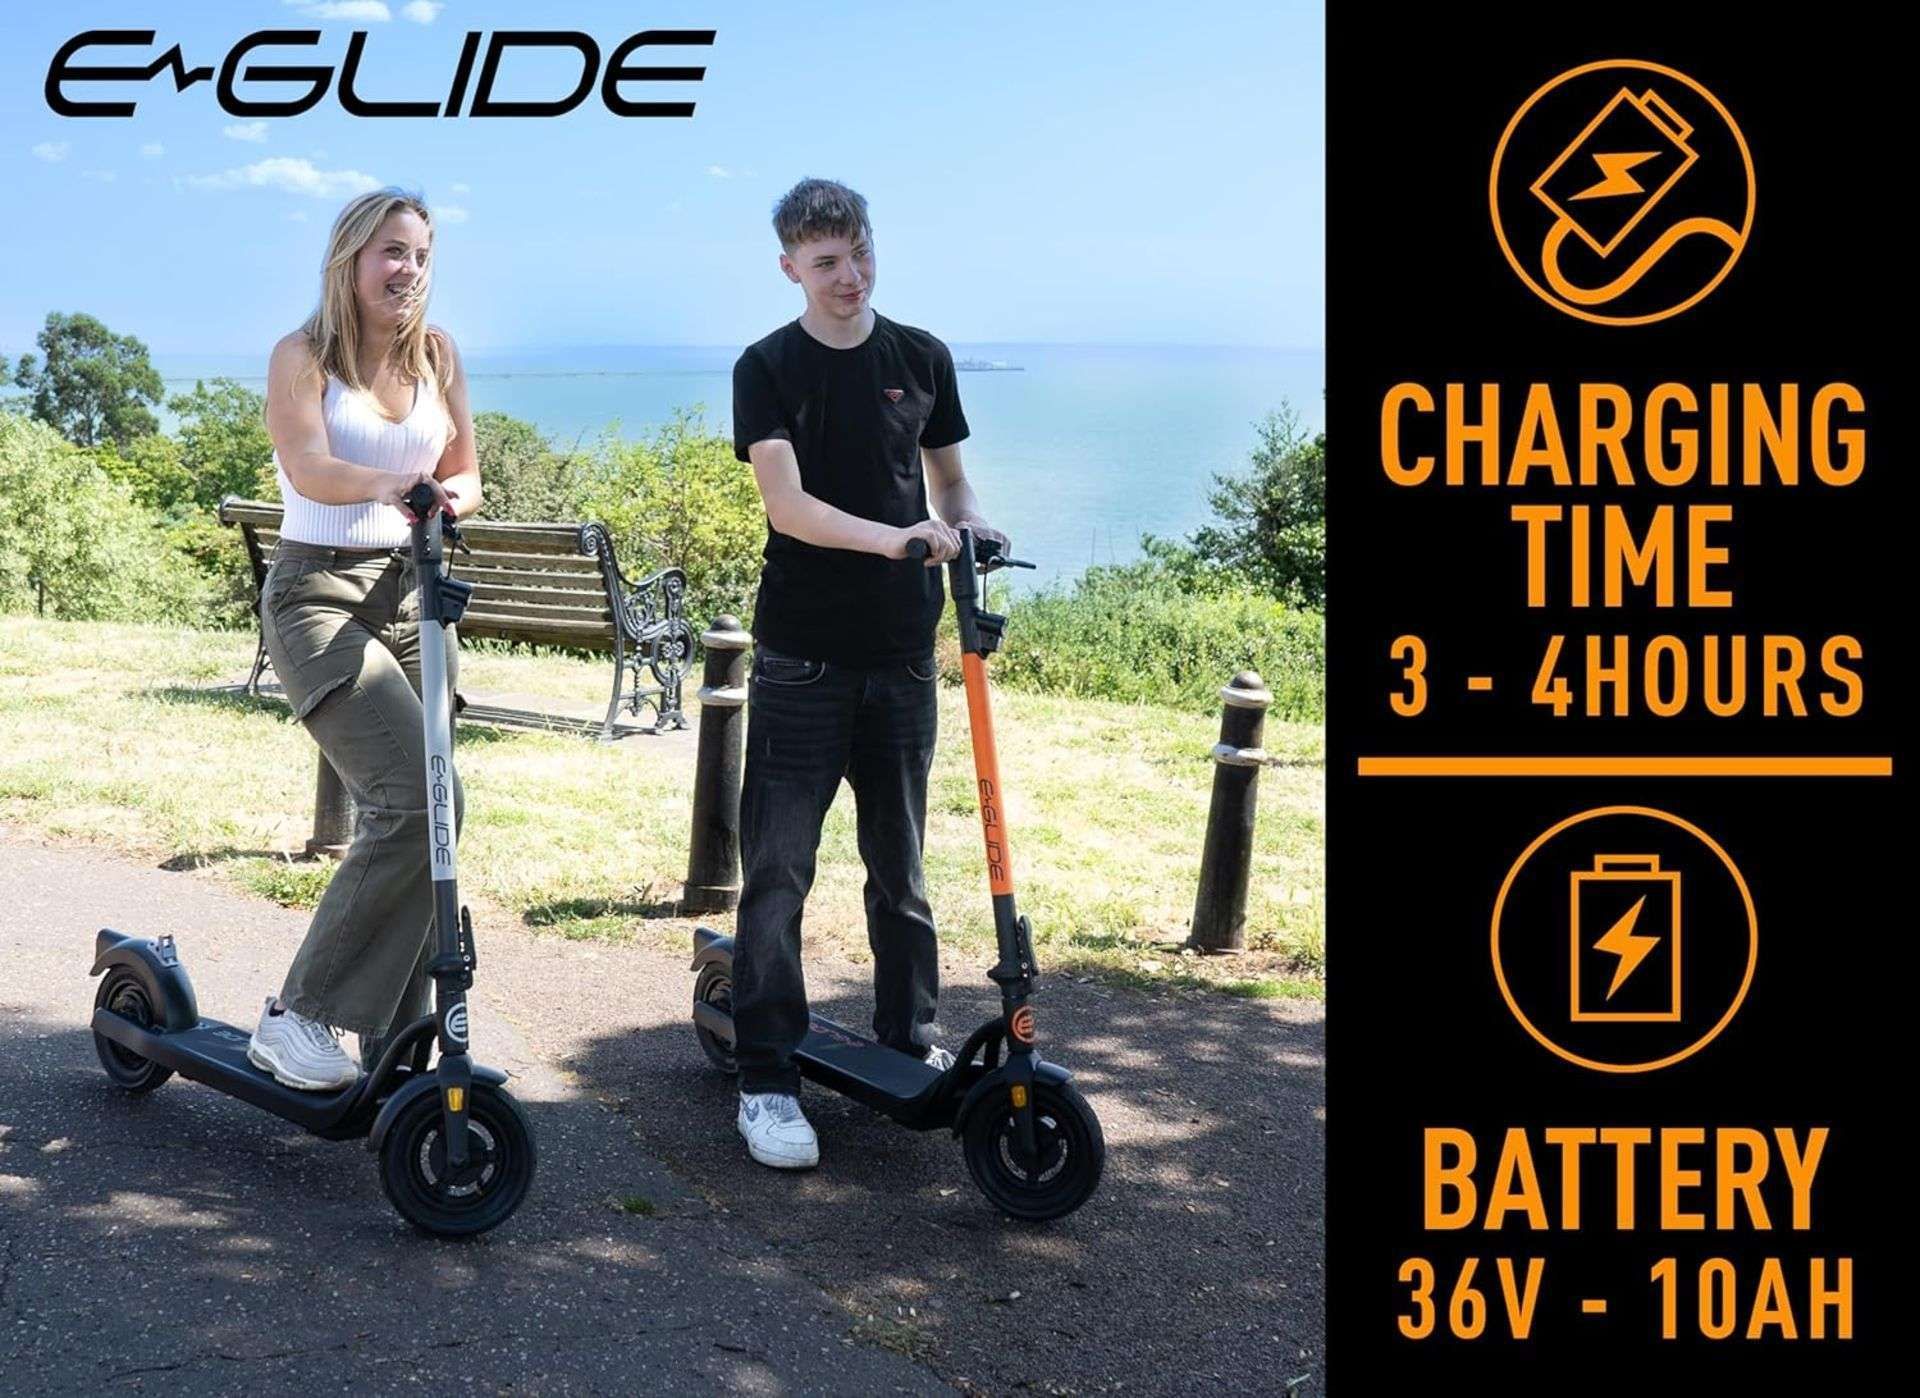 Trade Lot 4 x Brand New E-Glide V2 Electric Scooter Grey and Black RRP £599, Introducing a sleek and - Bild 4 aus 5